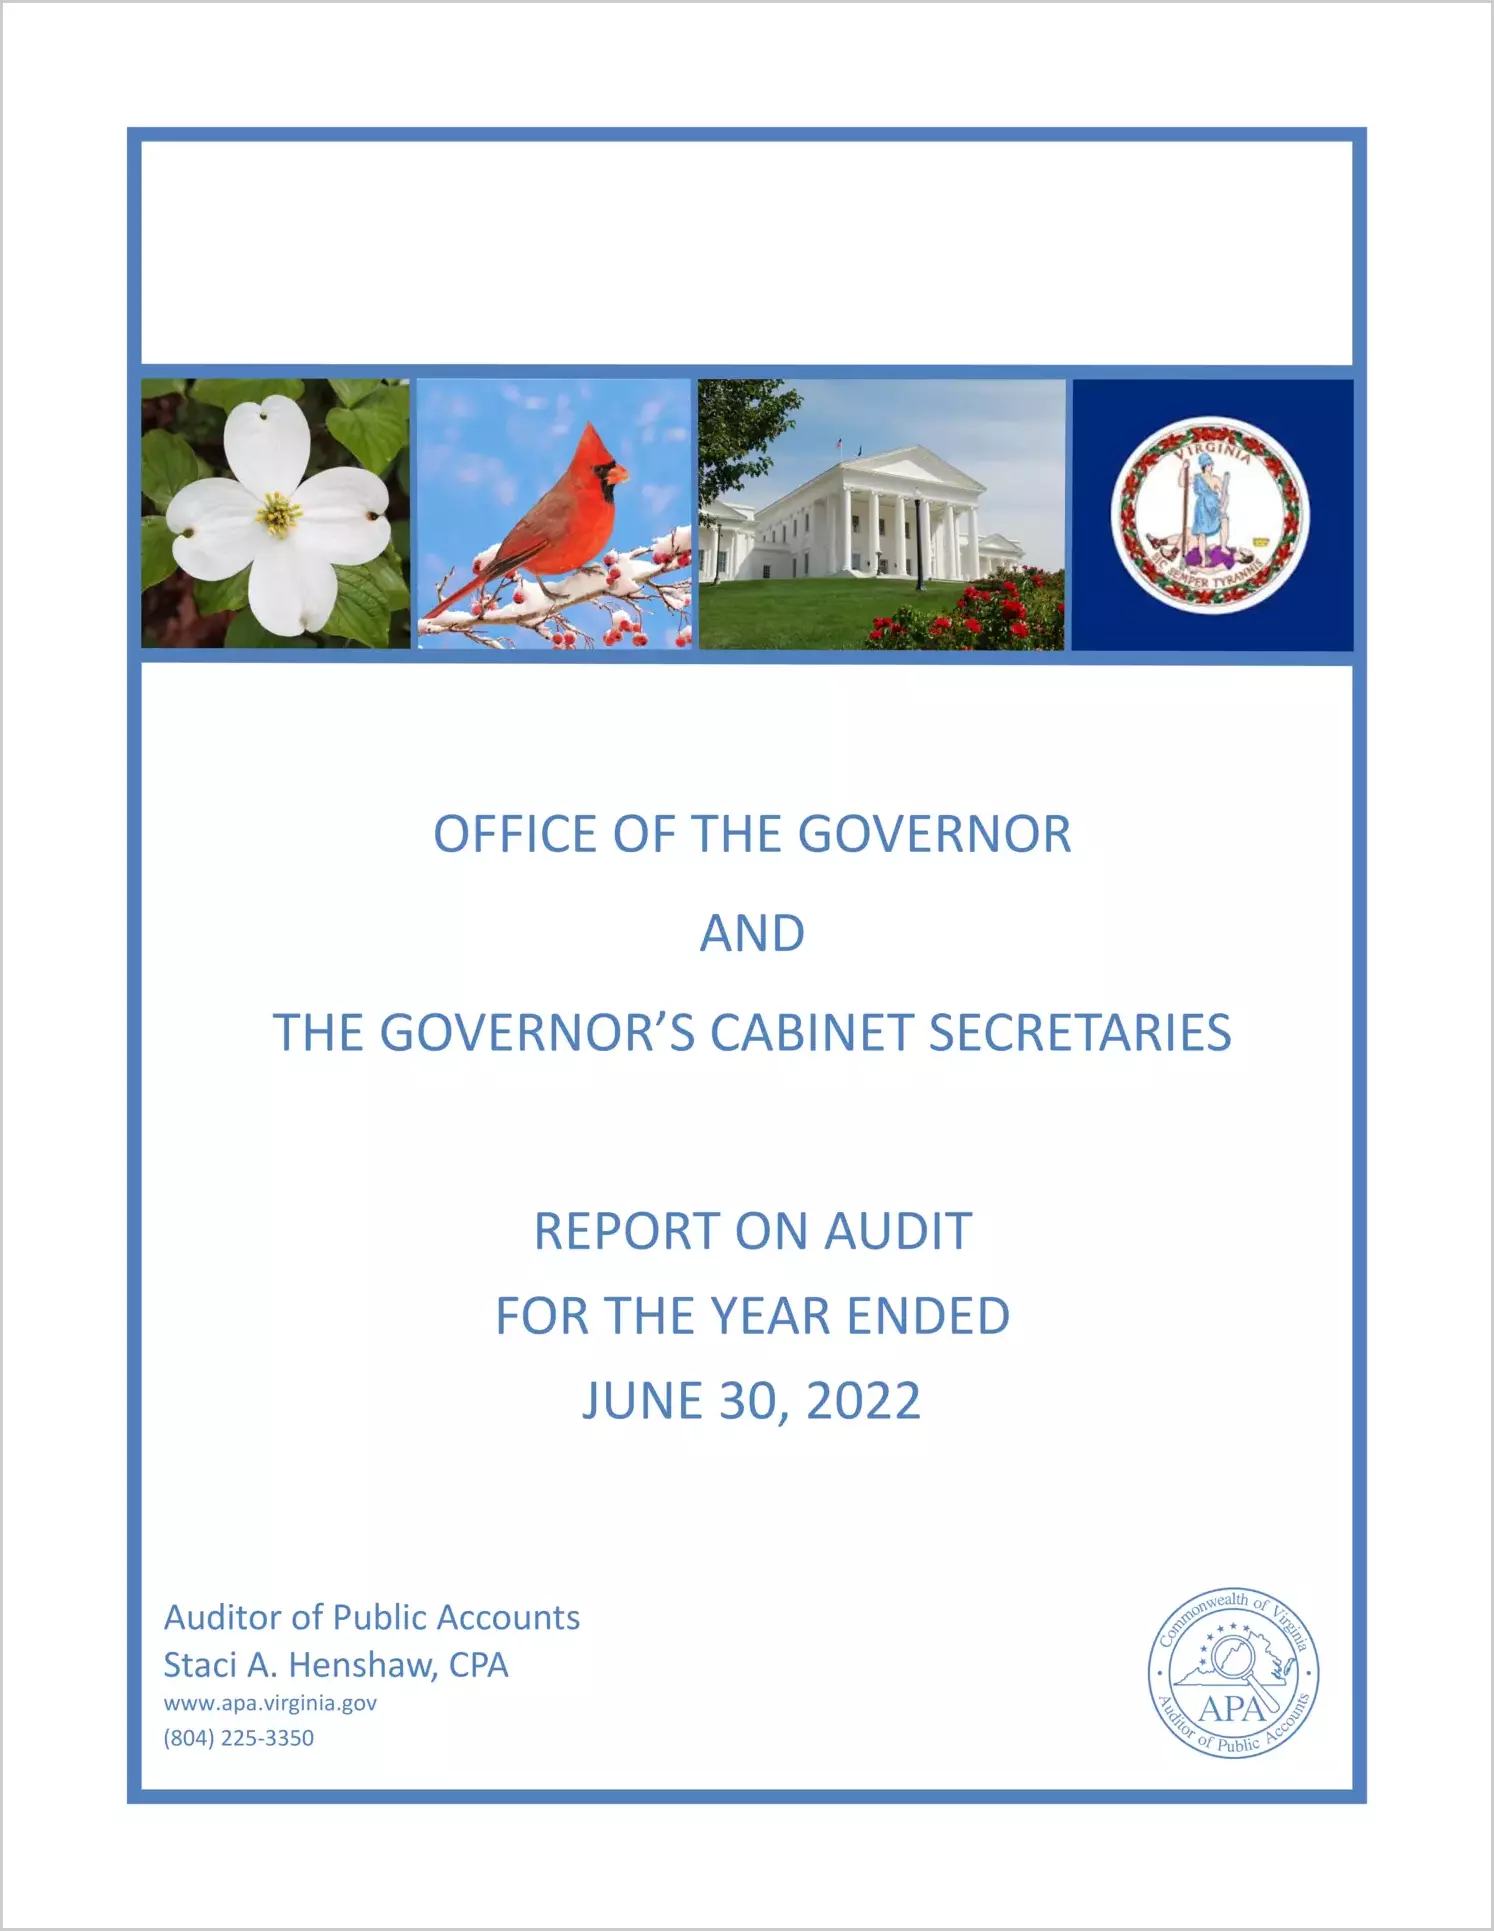 Office of the Governor and the Governor's Cabinet Secretaries for the year ended June 30, 2022